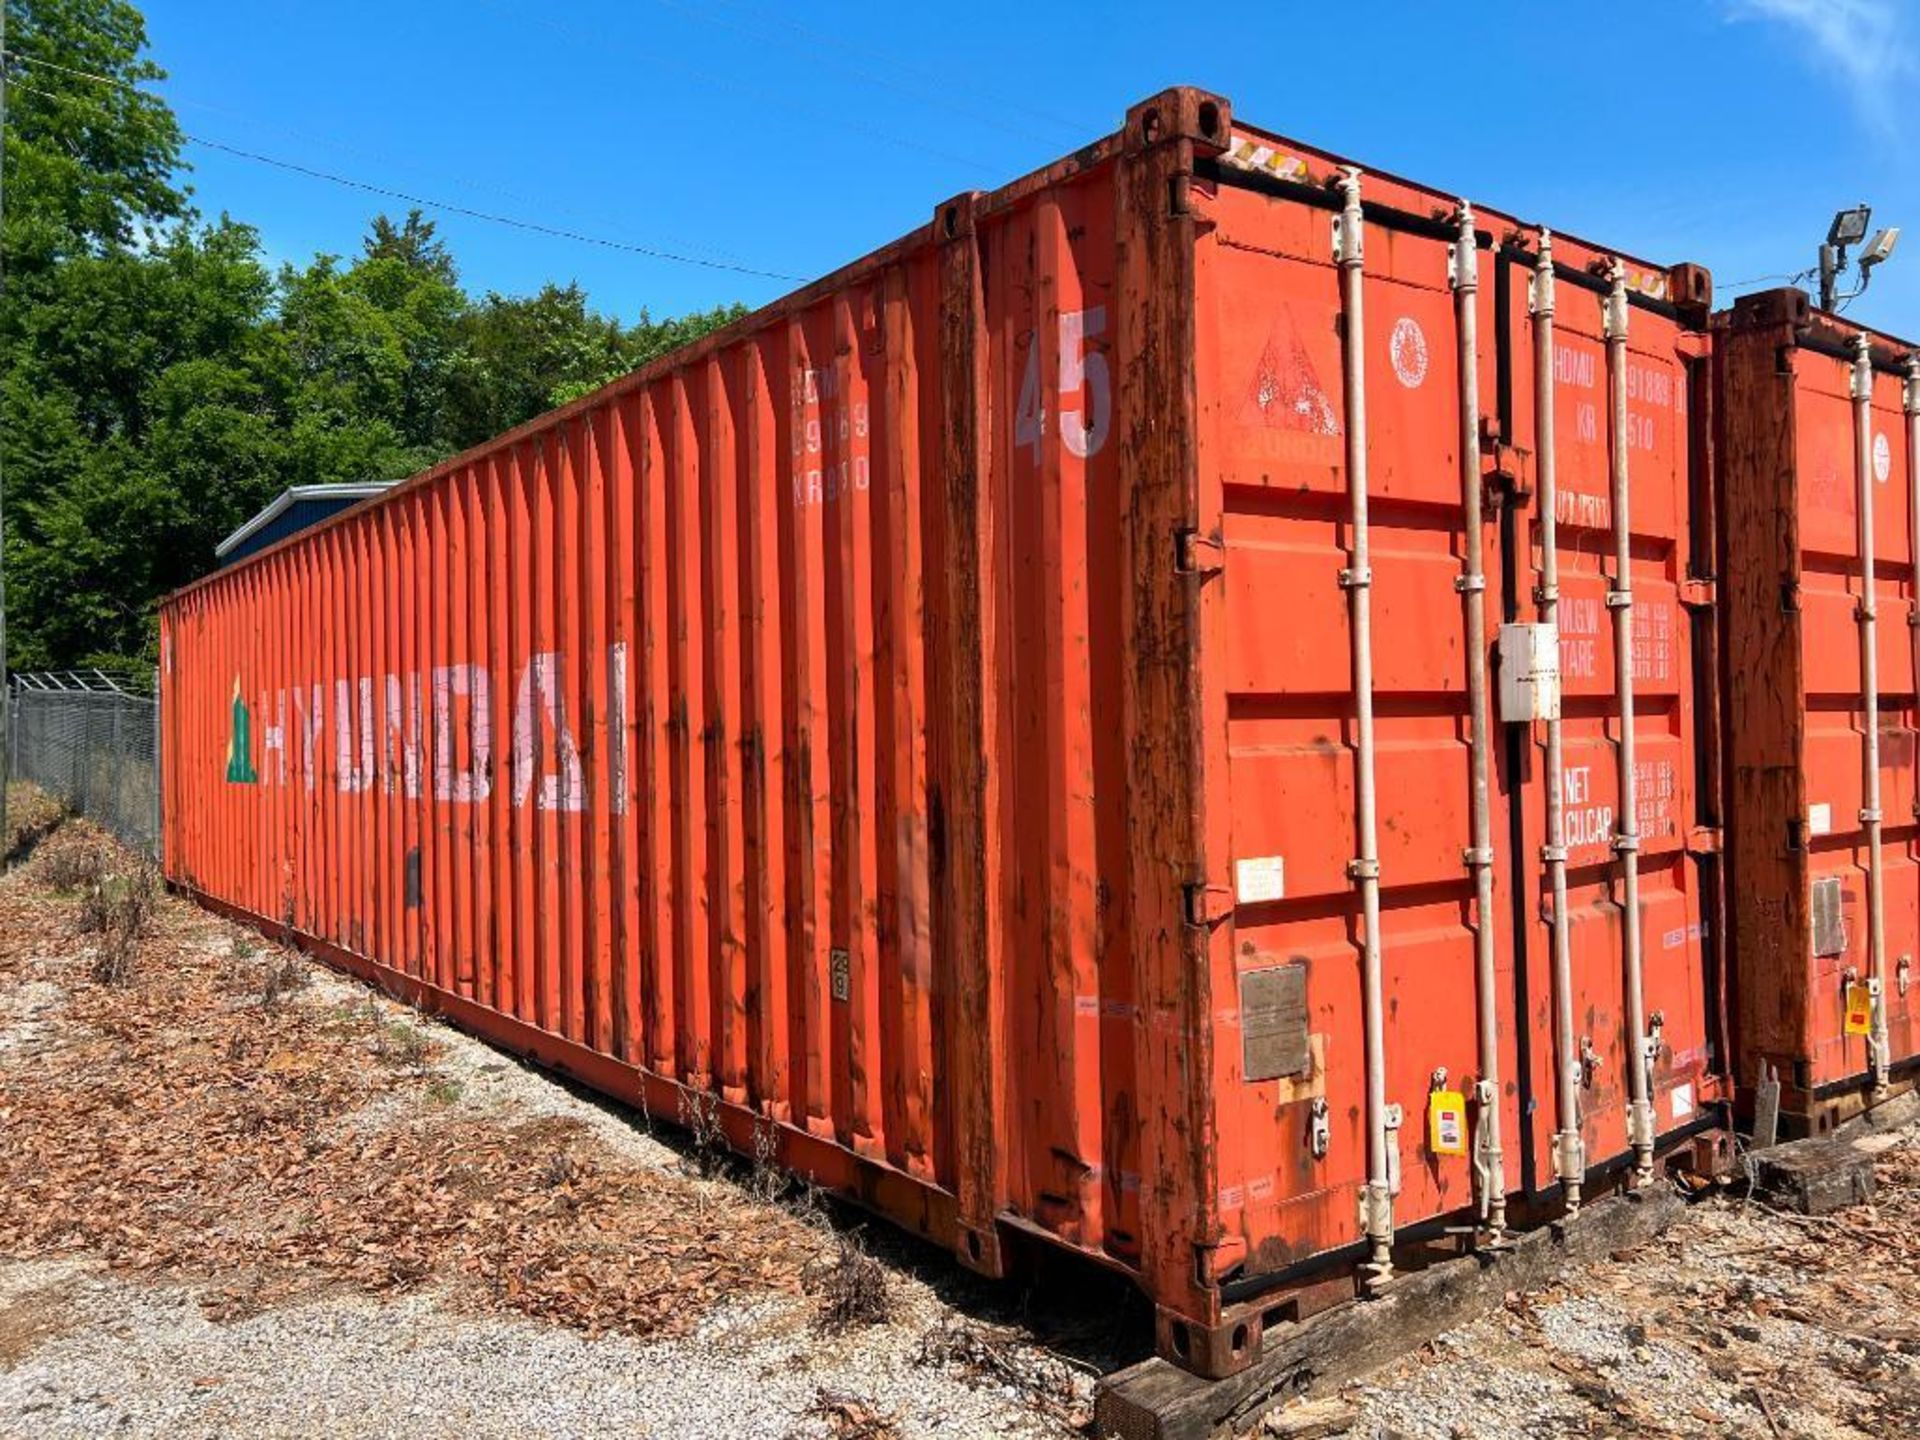 Hyundai 67,200 LB Capacity Shipping Container, Dimensions = 40' x 10' - Image 2 of 2